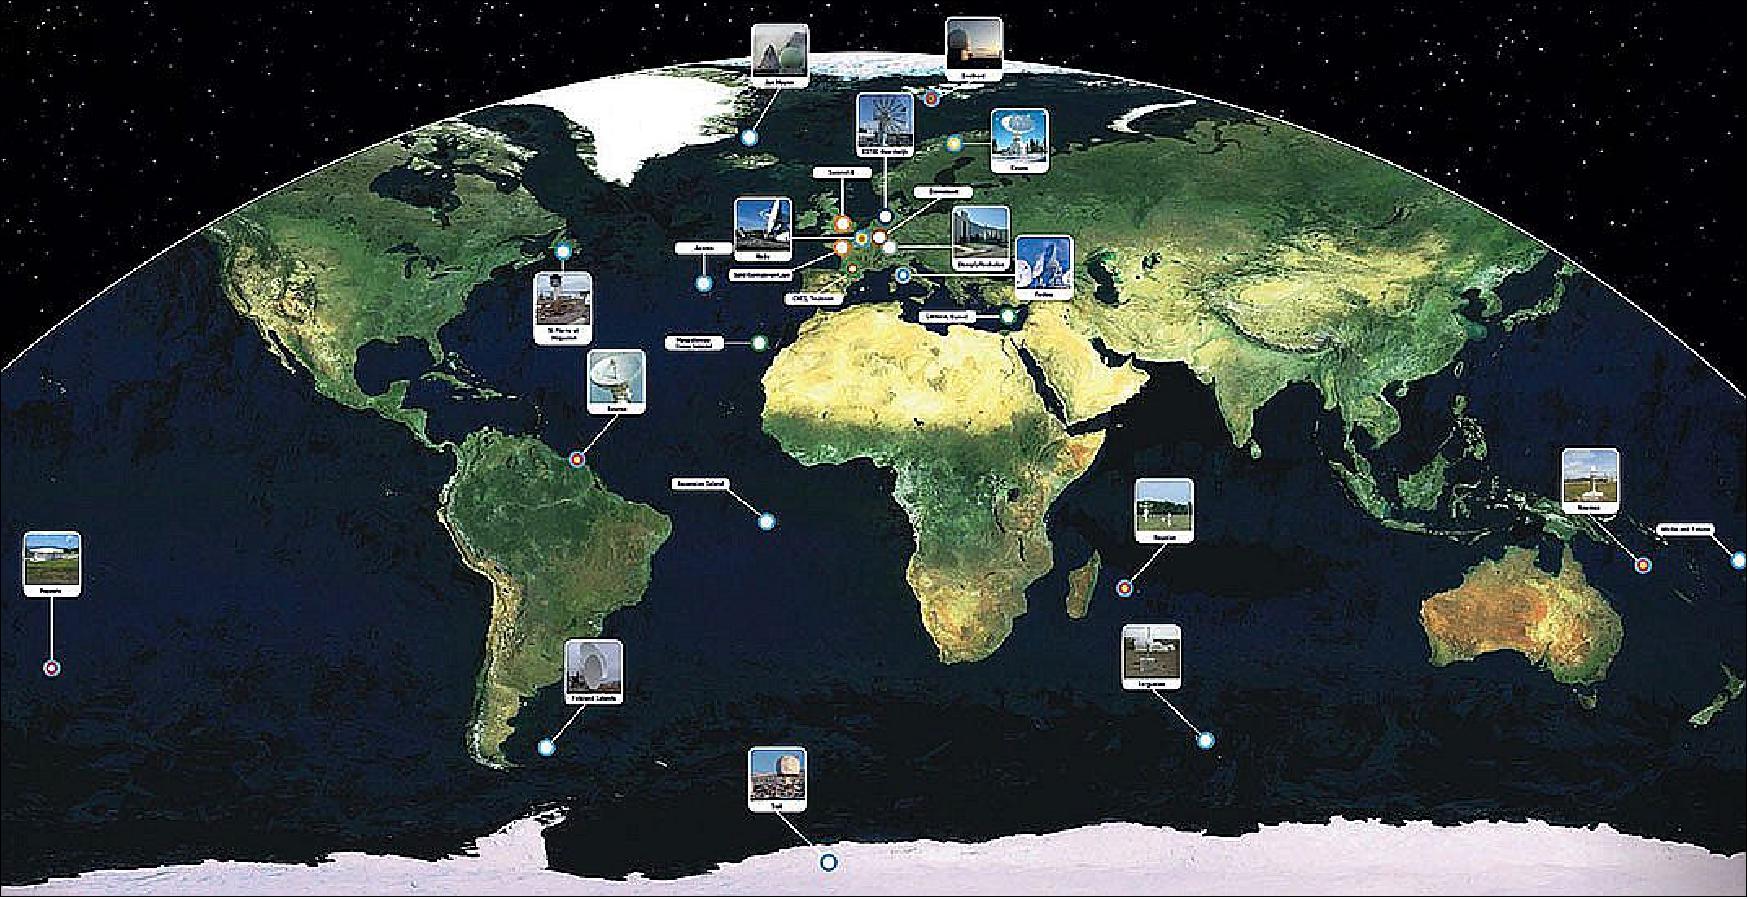 Figure 105: The worldwide Galileo ground segment includes two control centers (Italy and Germany) as well as various tracking, uplink and sensor stations and monitoring and test centers (image credit: ESA)